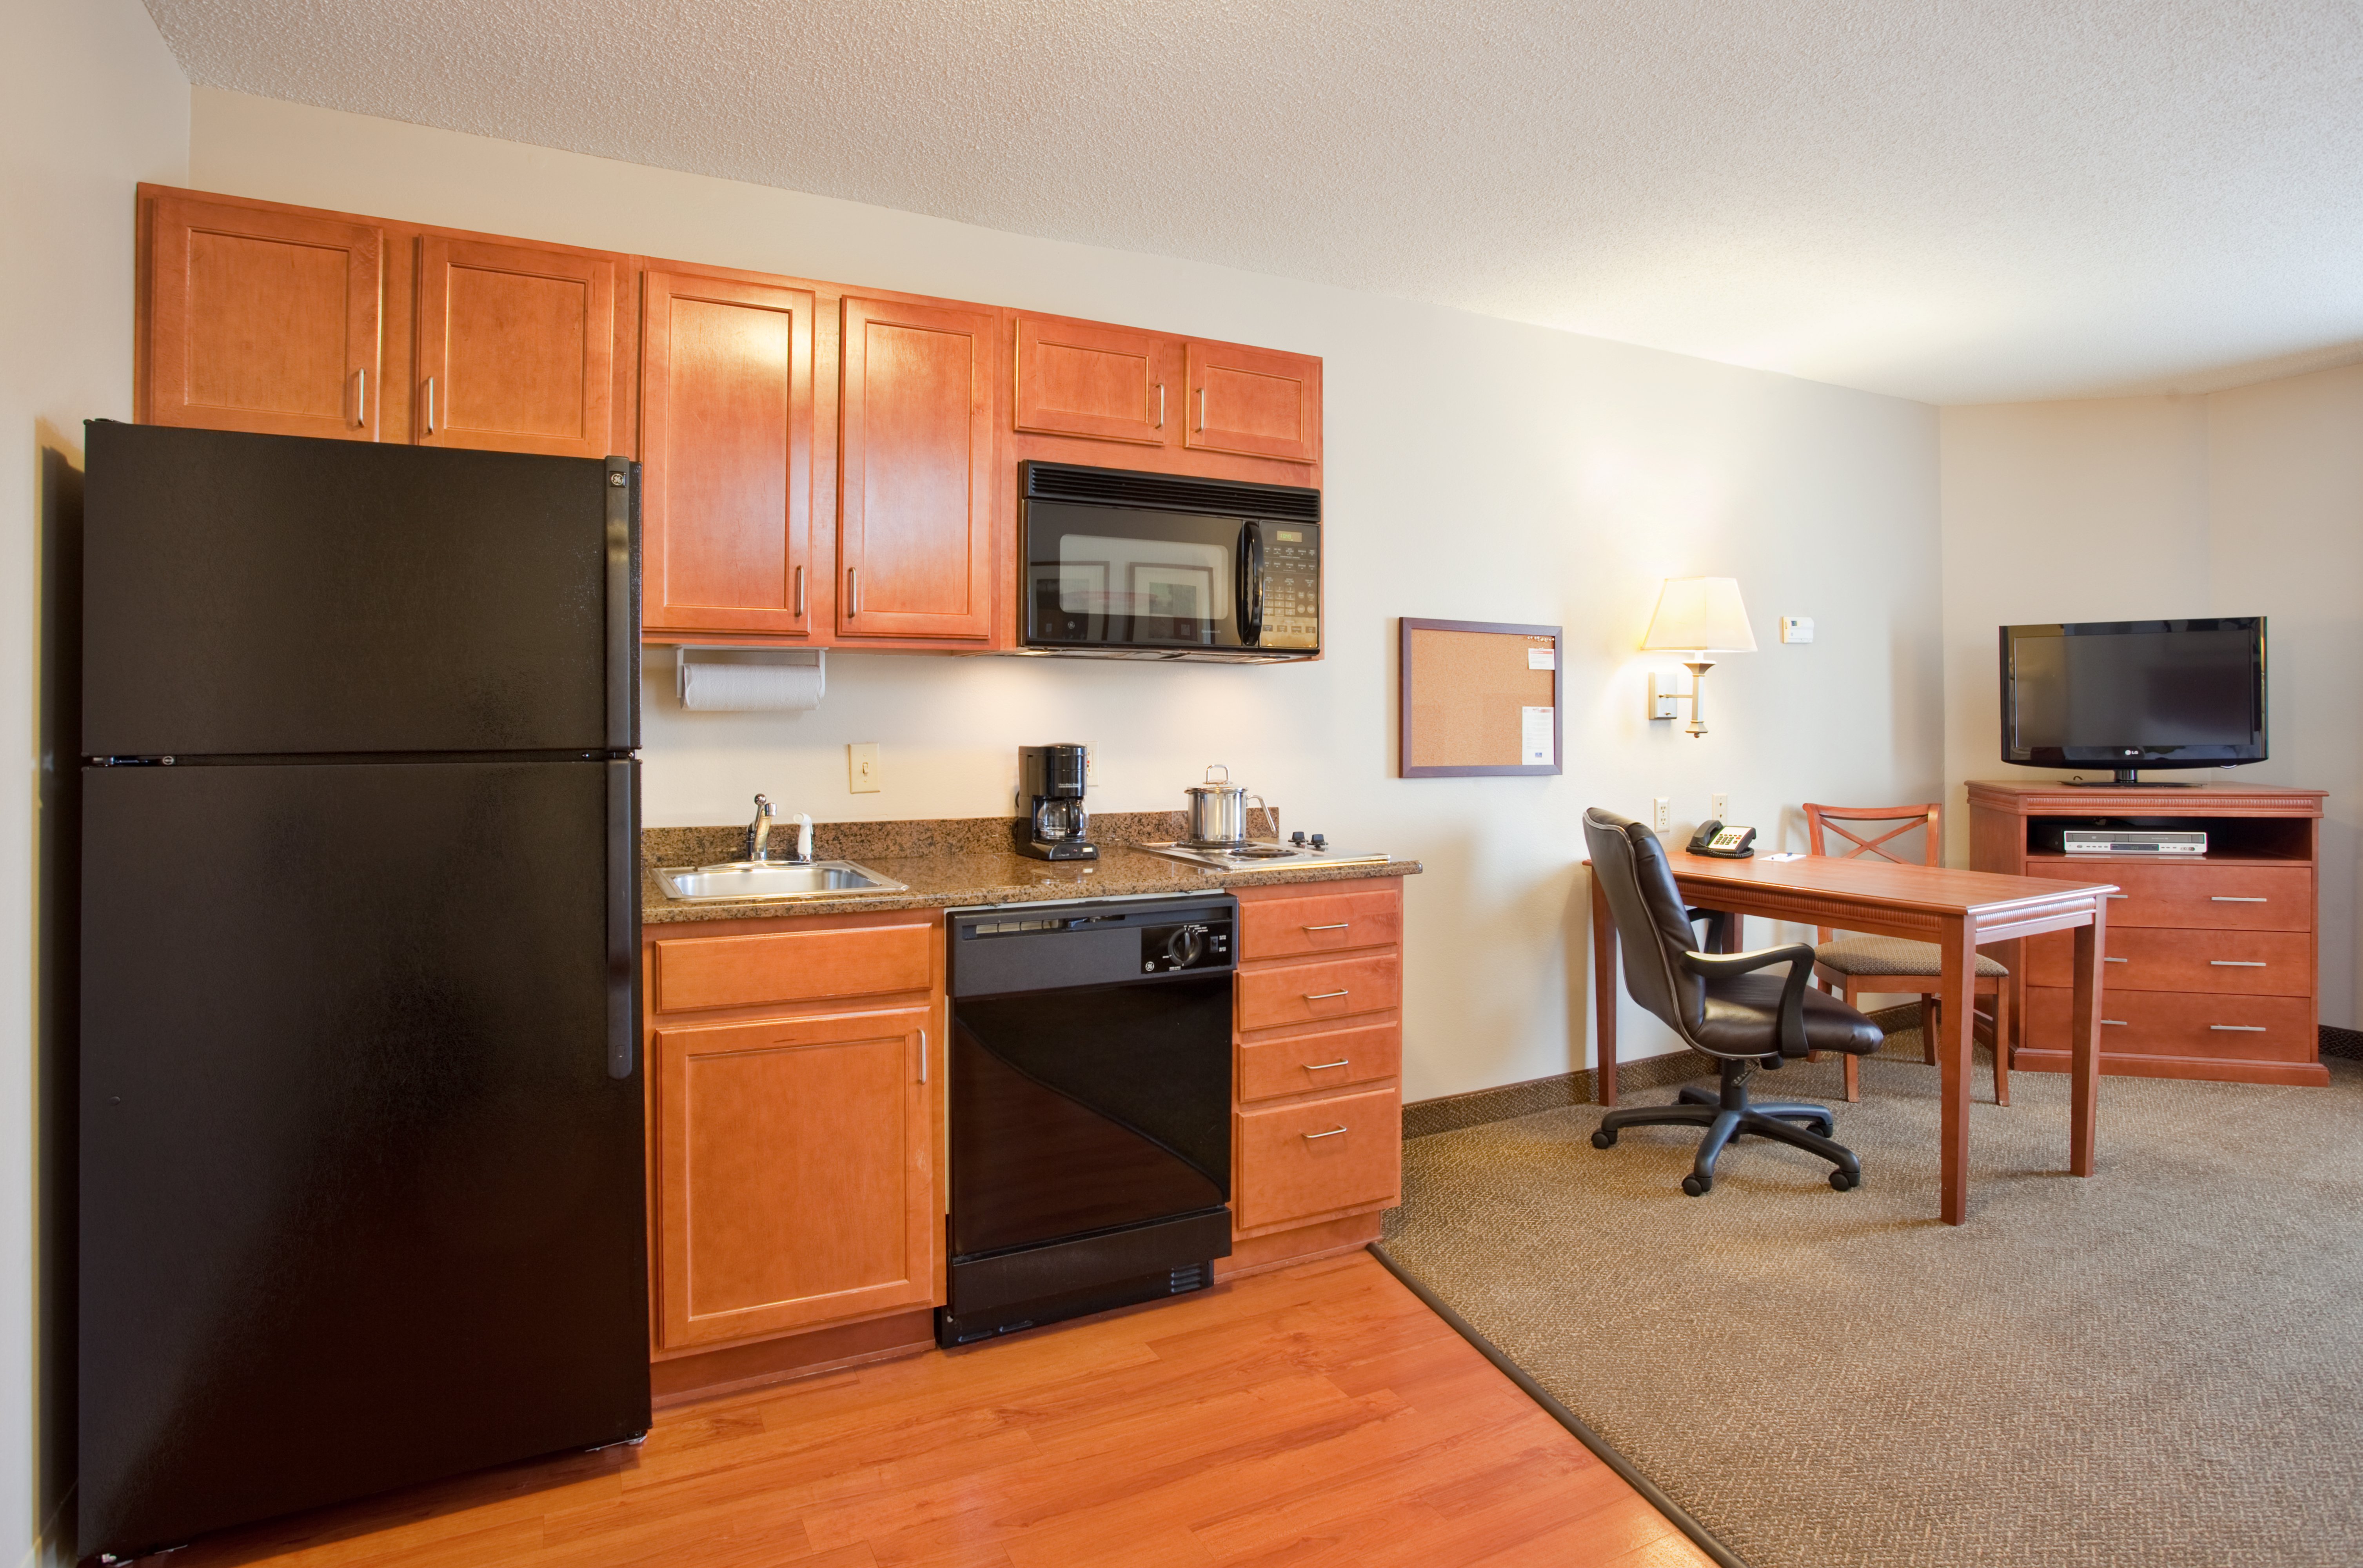 Full kitchen and desk in every suite.